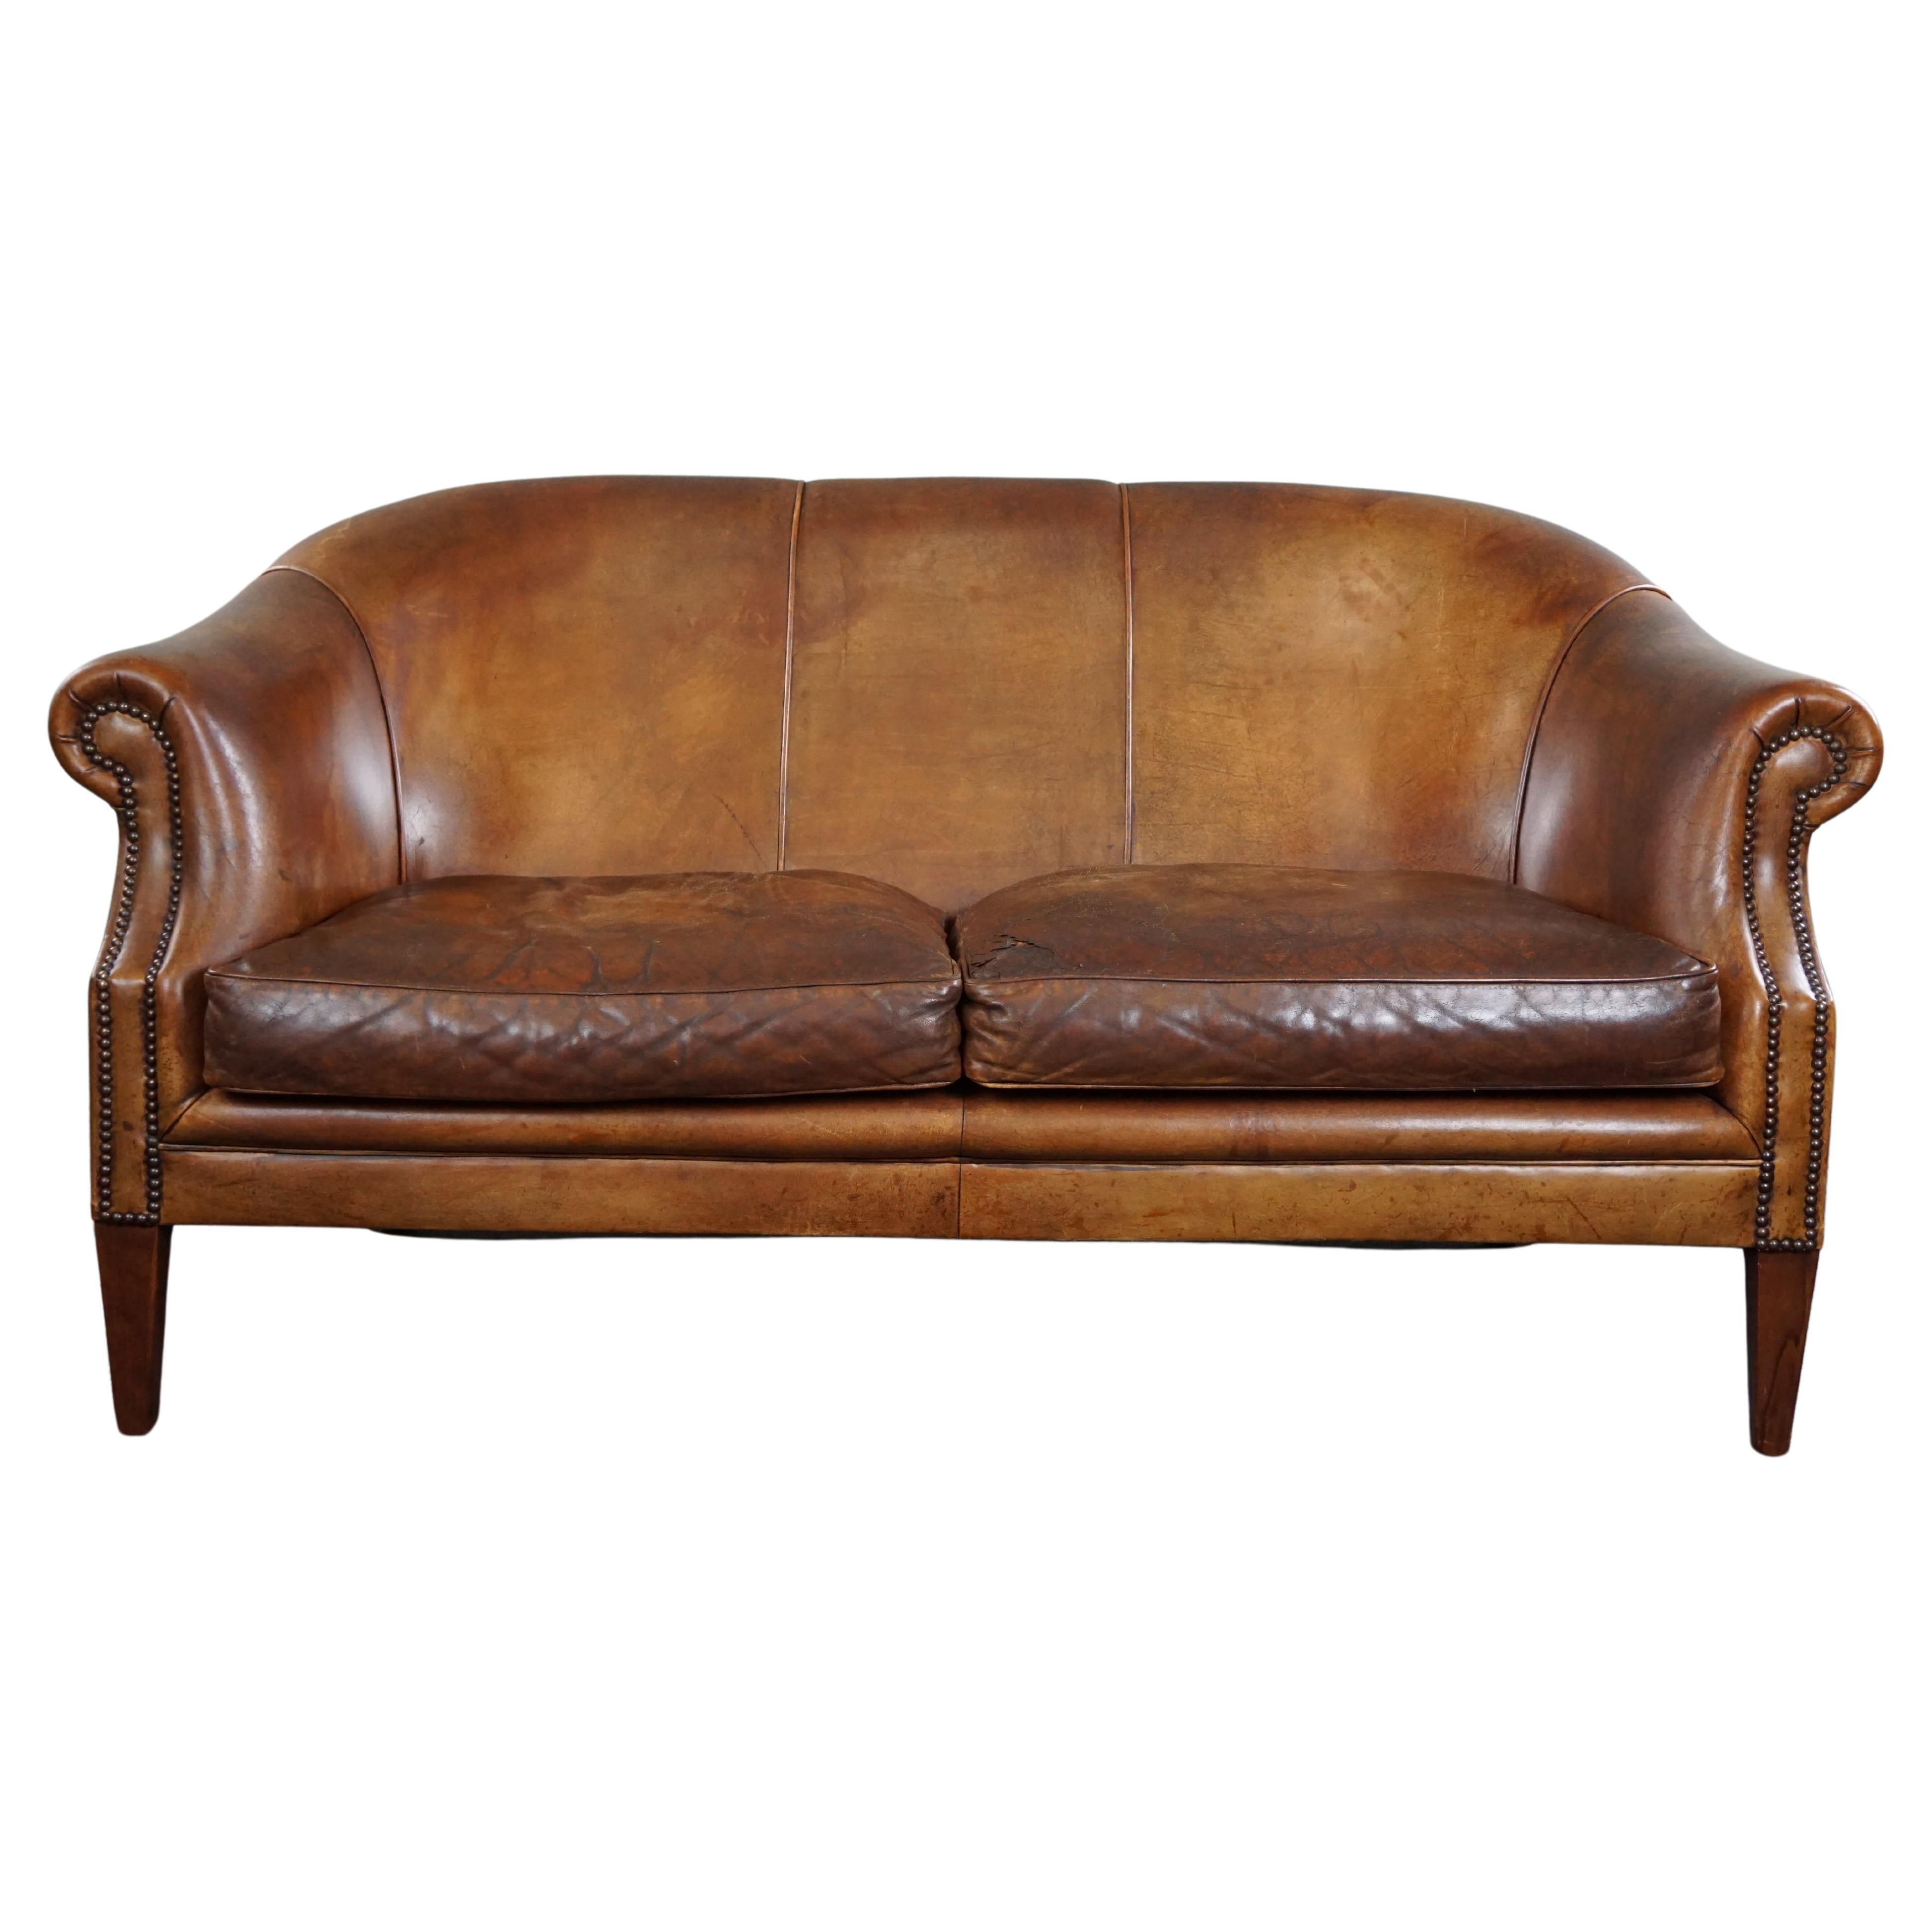 Super rugged vintage sheep leather 2-seater sofa in club style